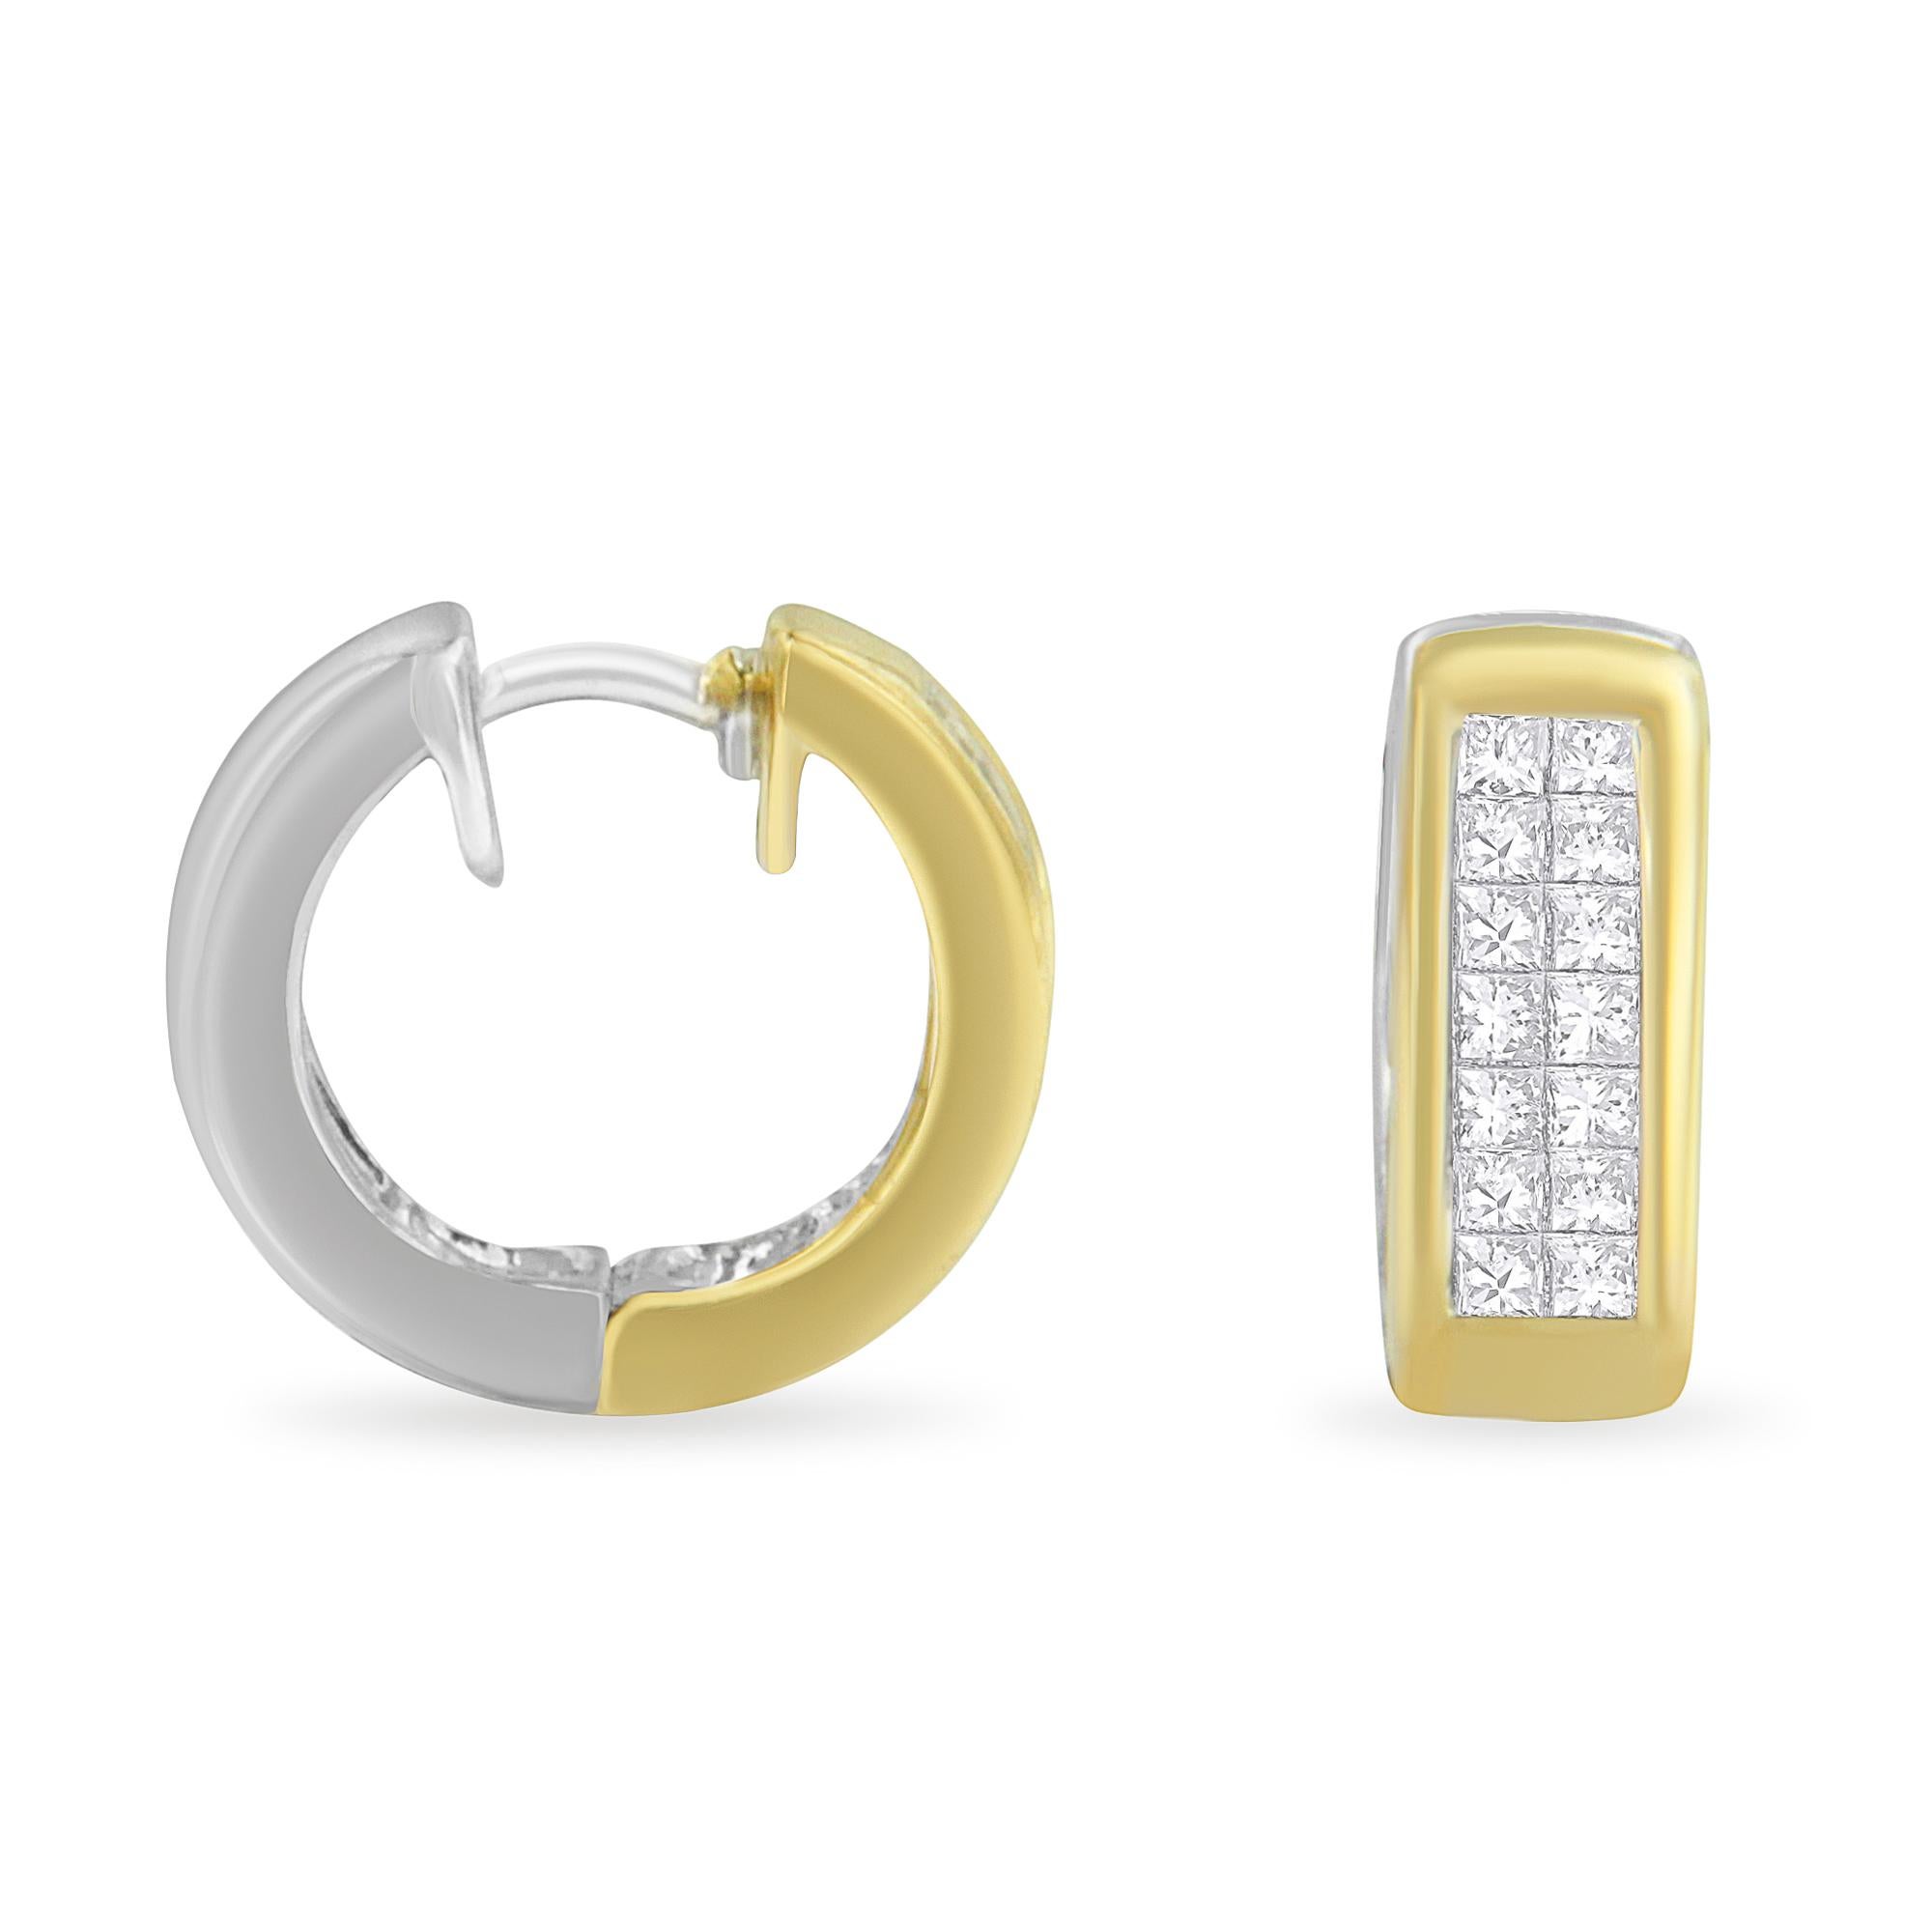 Beautifully crafted of high-quality 14-karat yellow gold, these stunning hoop earrings hold 0.5 carat of dazzling, round and princess cut diamonds. Polished to a high shine finish, these earrings secure with push-on-screw-off clasp. Wear it up for a